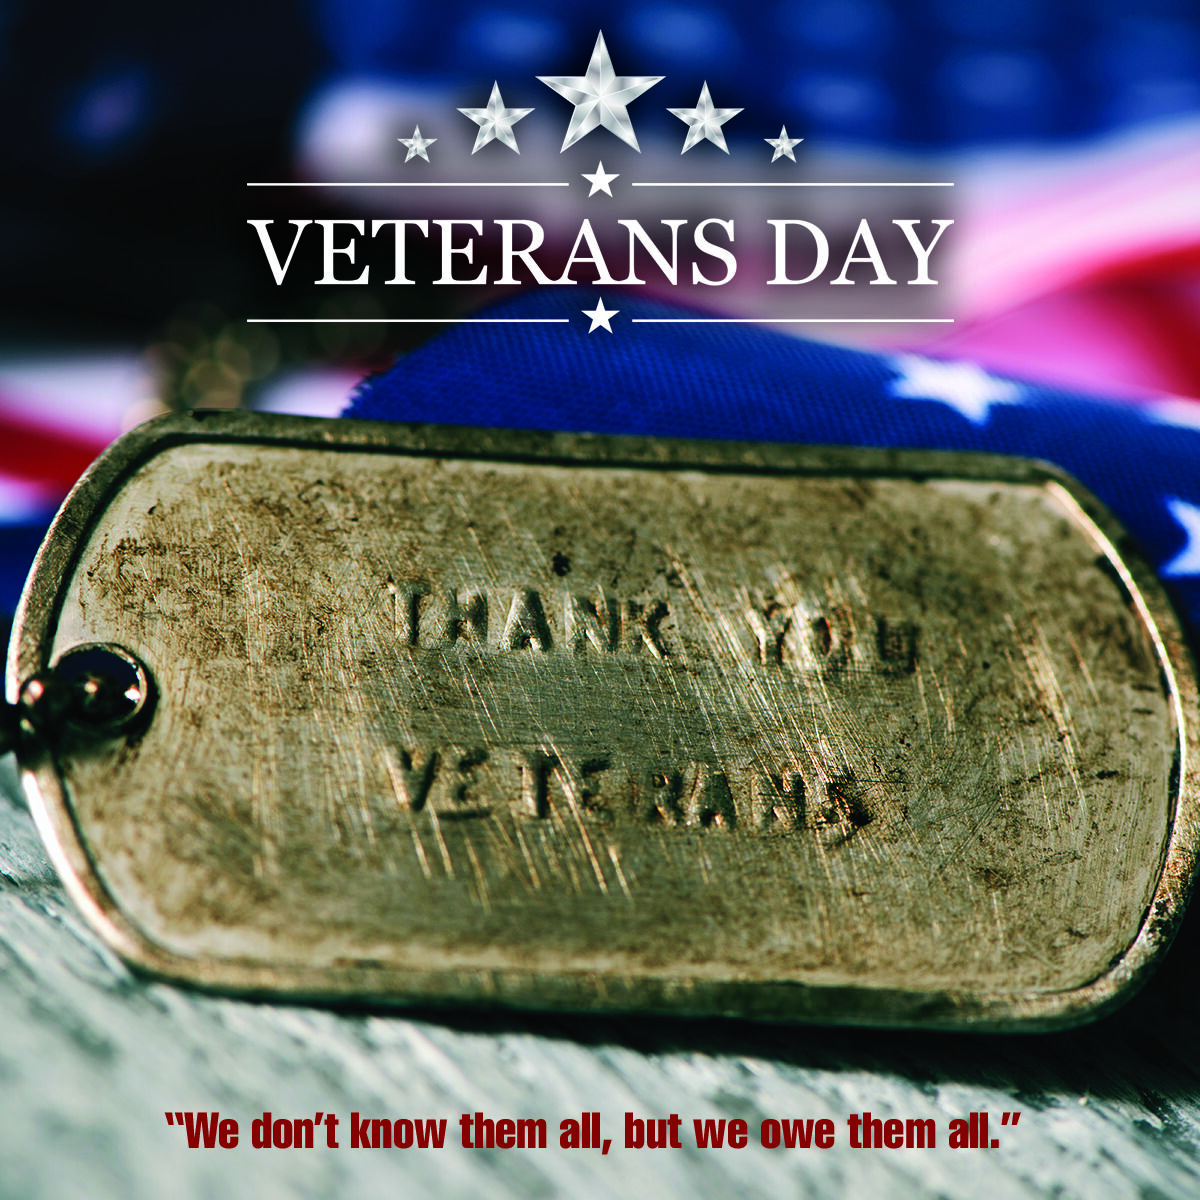 dog tag with "auto draft" engraved, set against a blurred american flag background with the text "veterans day" and a quote.